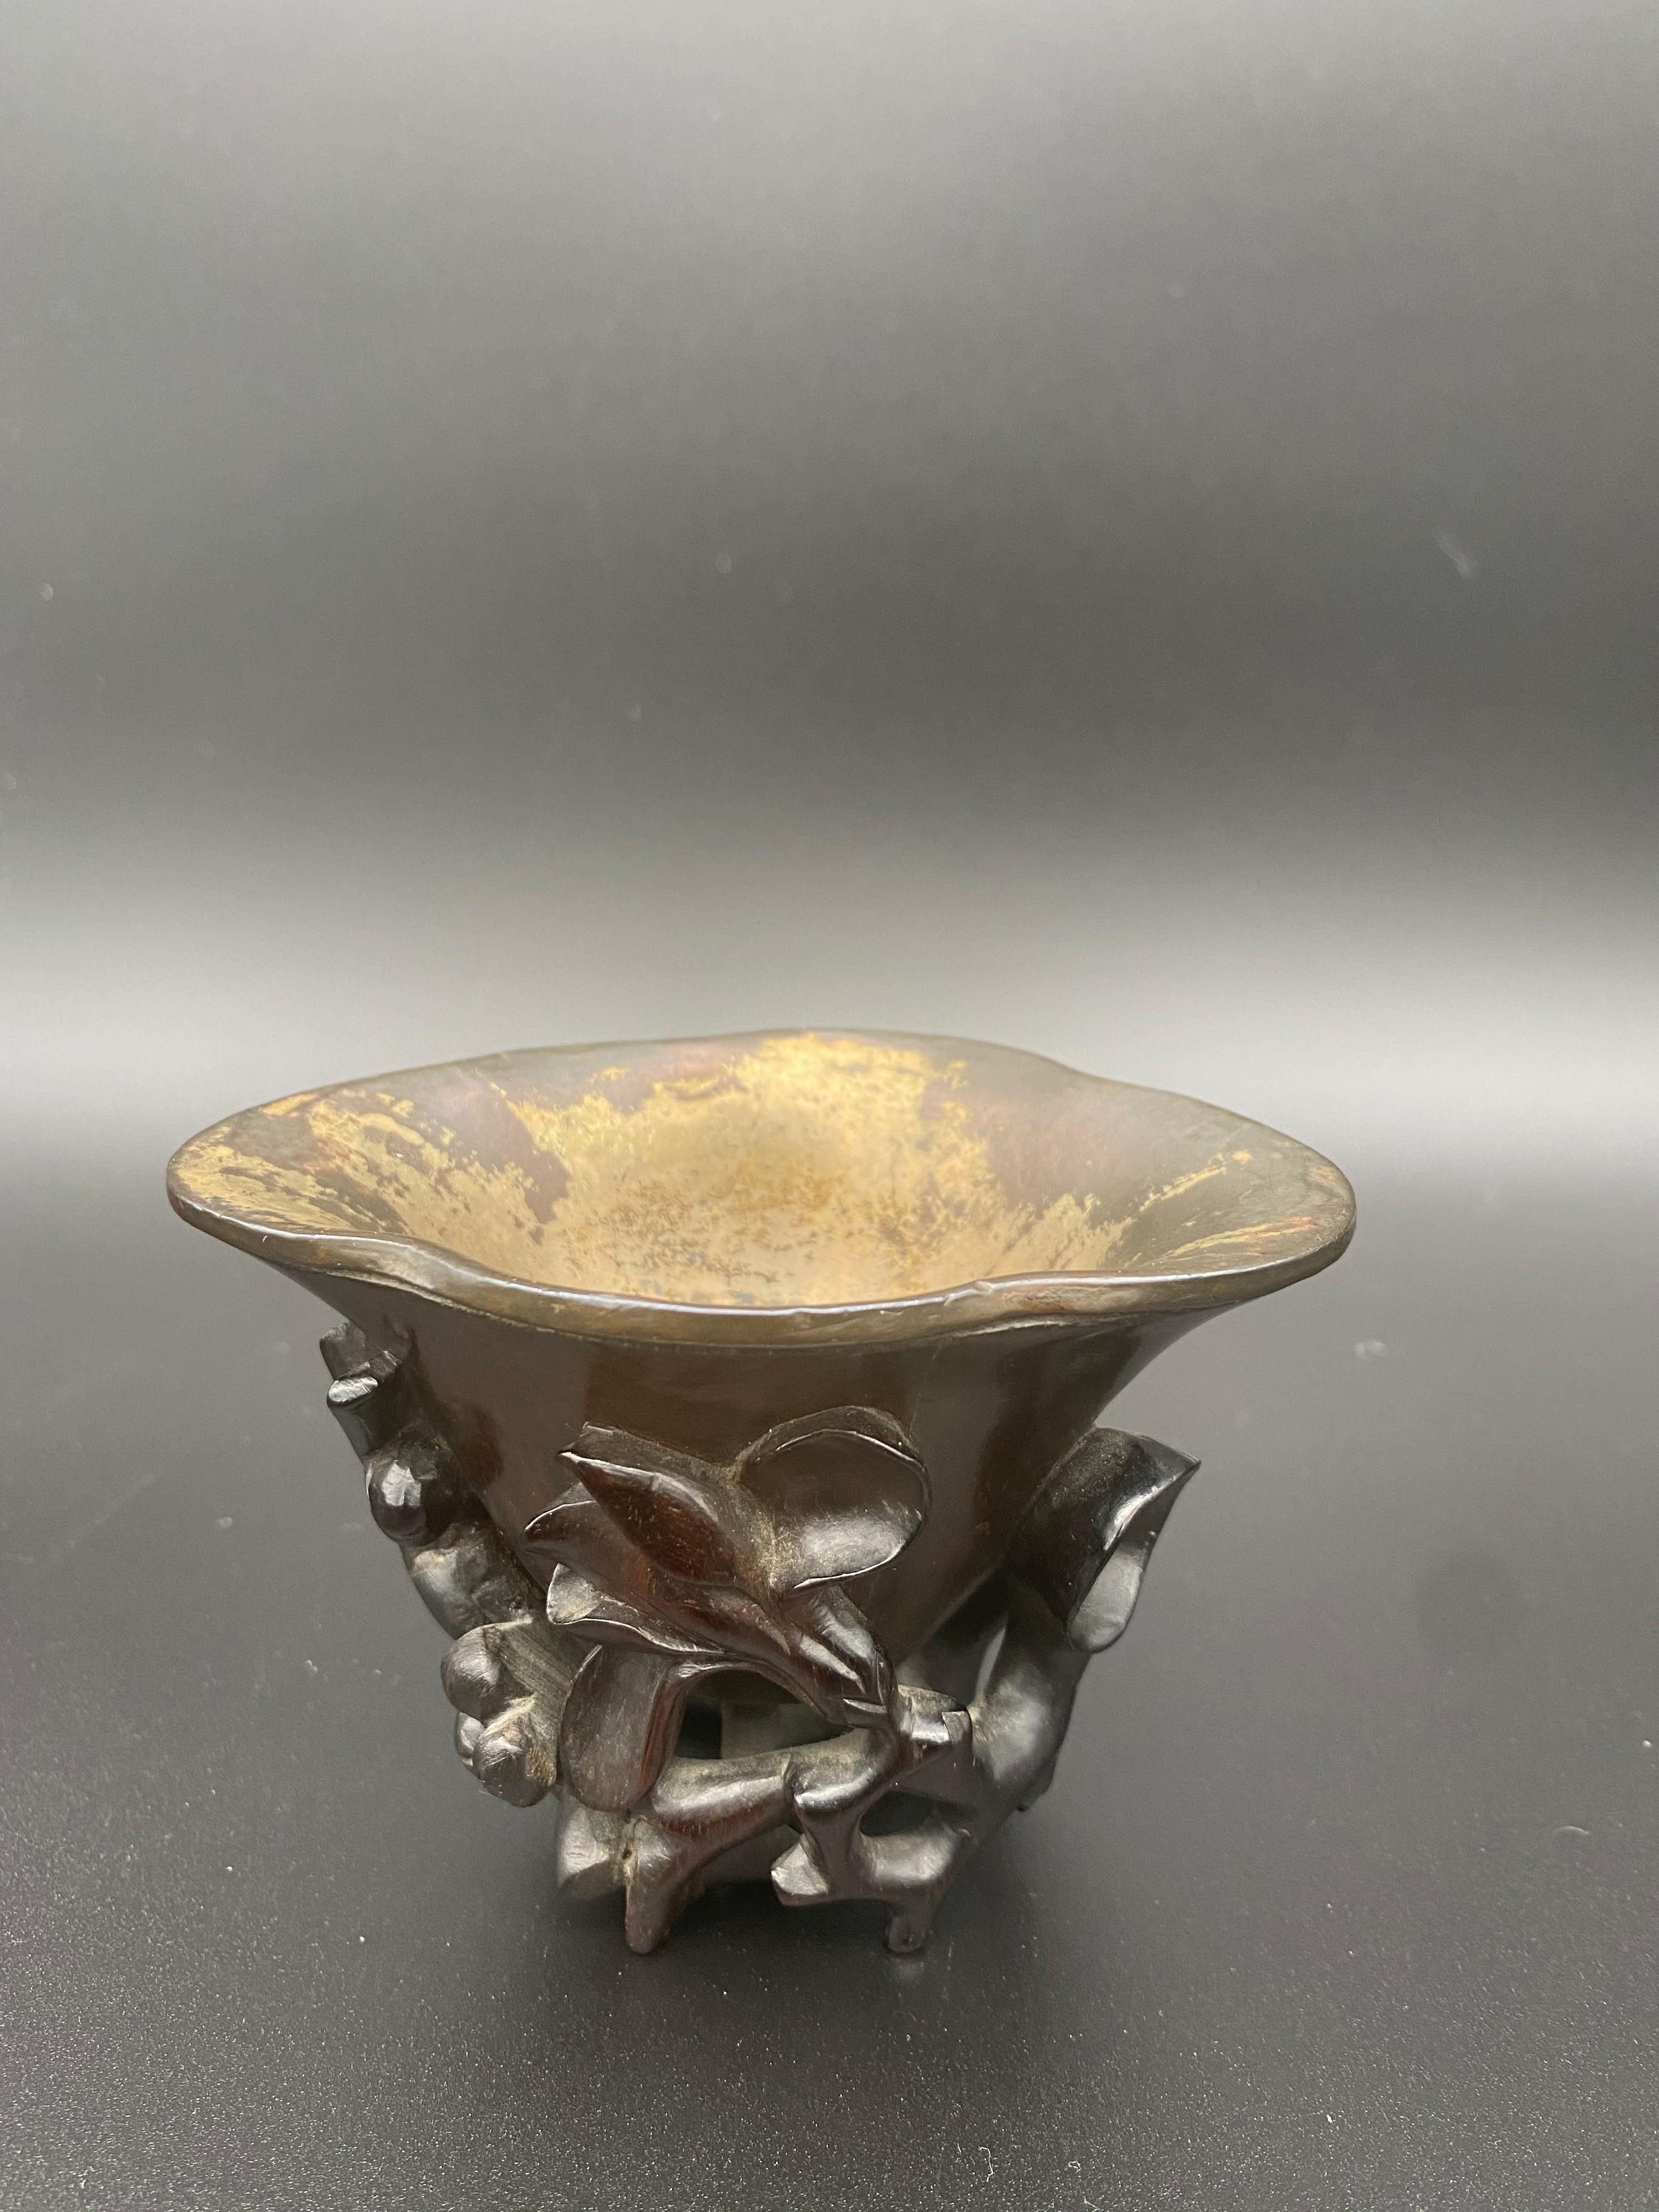 17th century Ming dynasty Chinese Zitan libation cup silver inlaid, of deep oval form , the exterior carved in high relief and undercut around the sides and base with gnarled branches if blossoming magnolia and plum flowers, with silver lining.